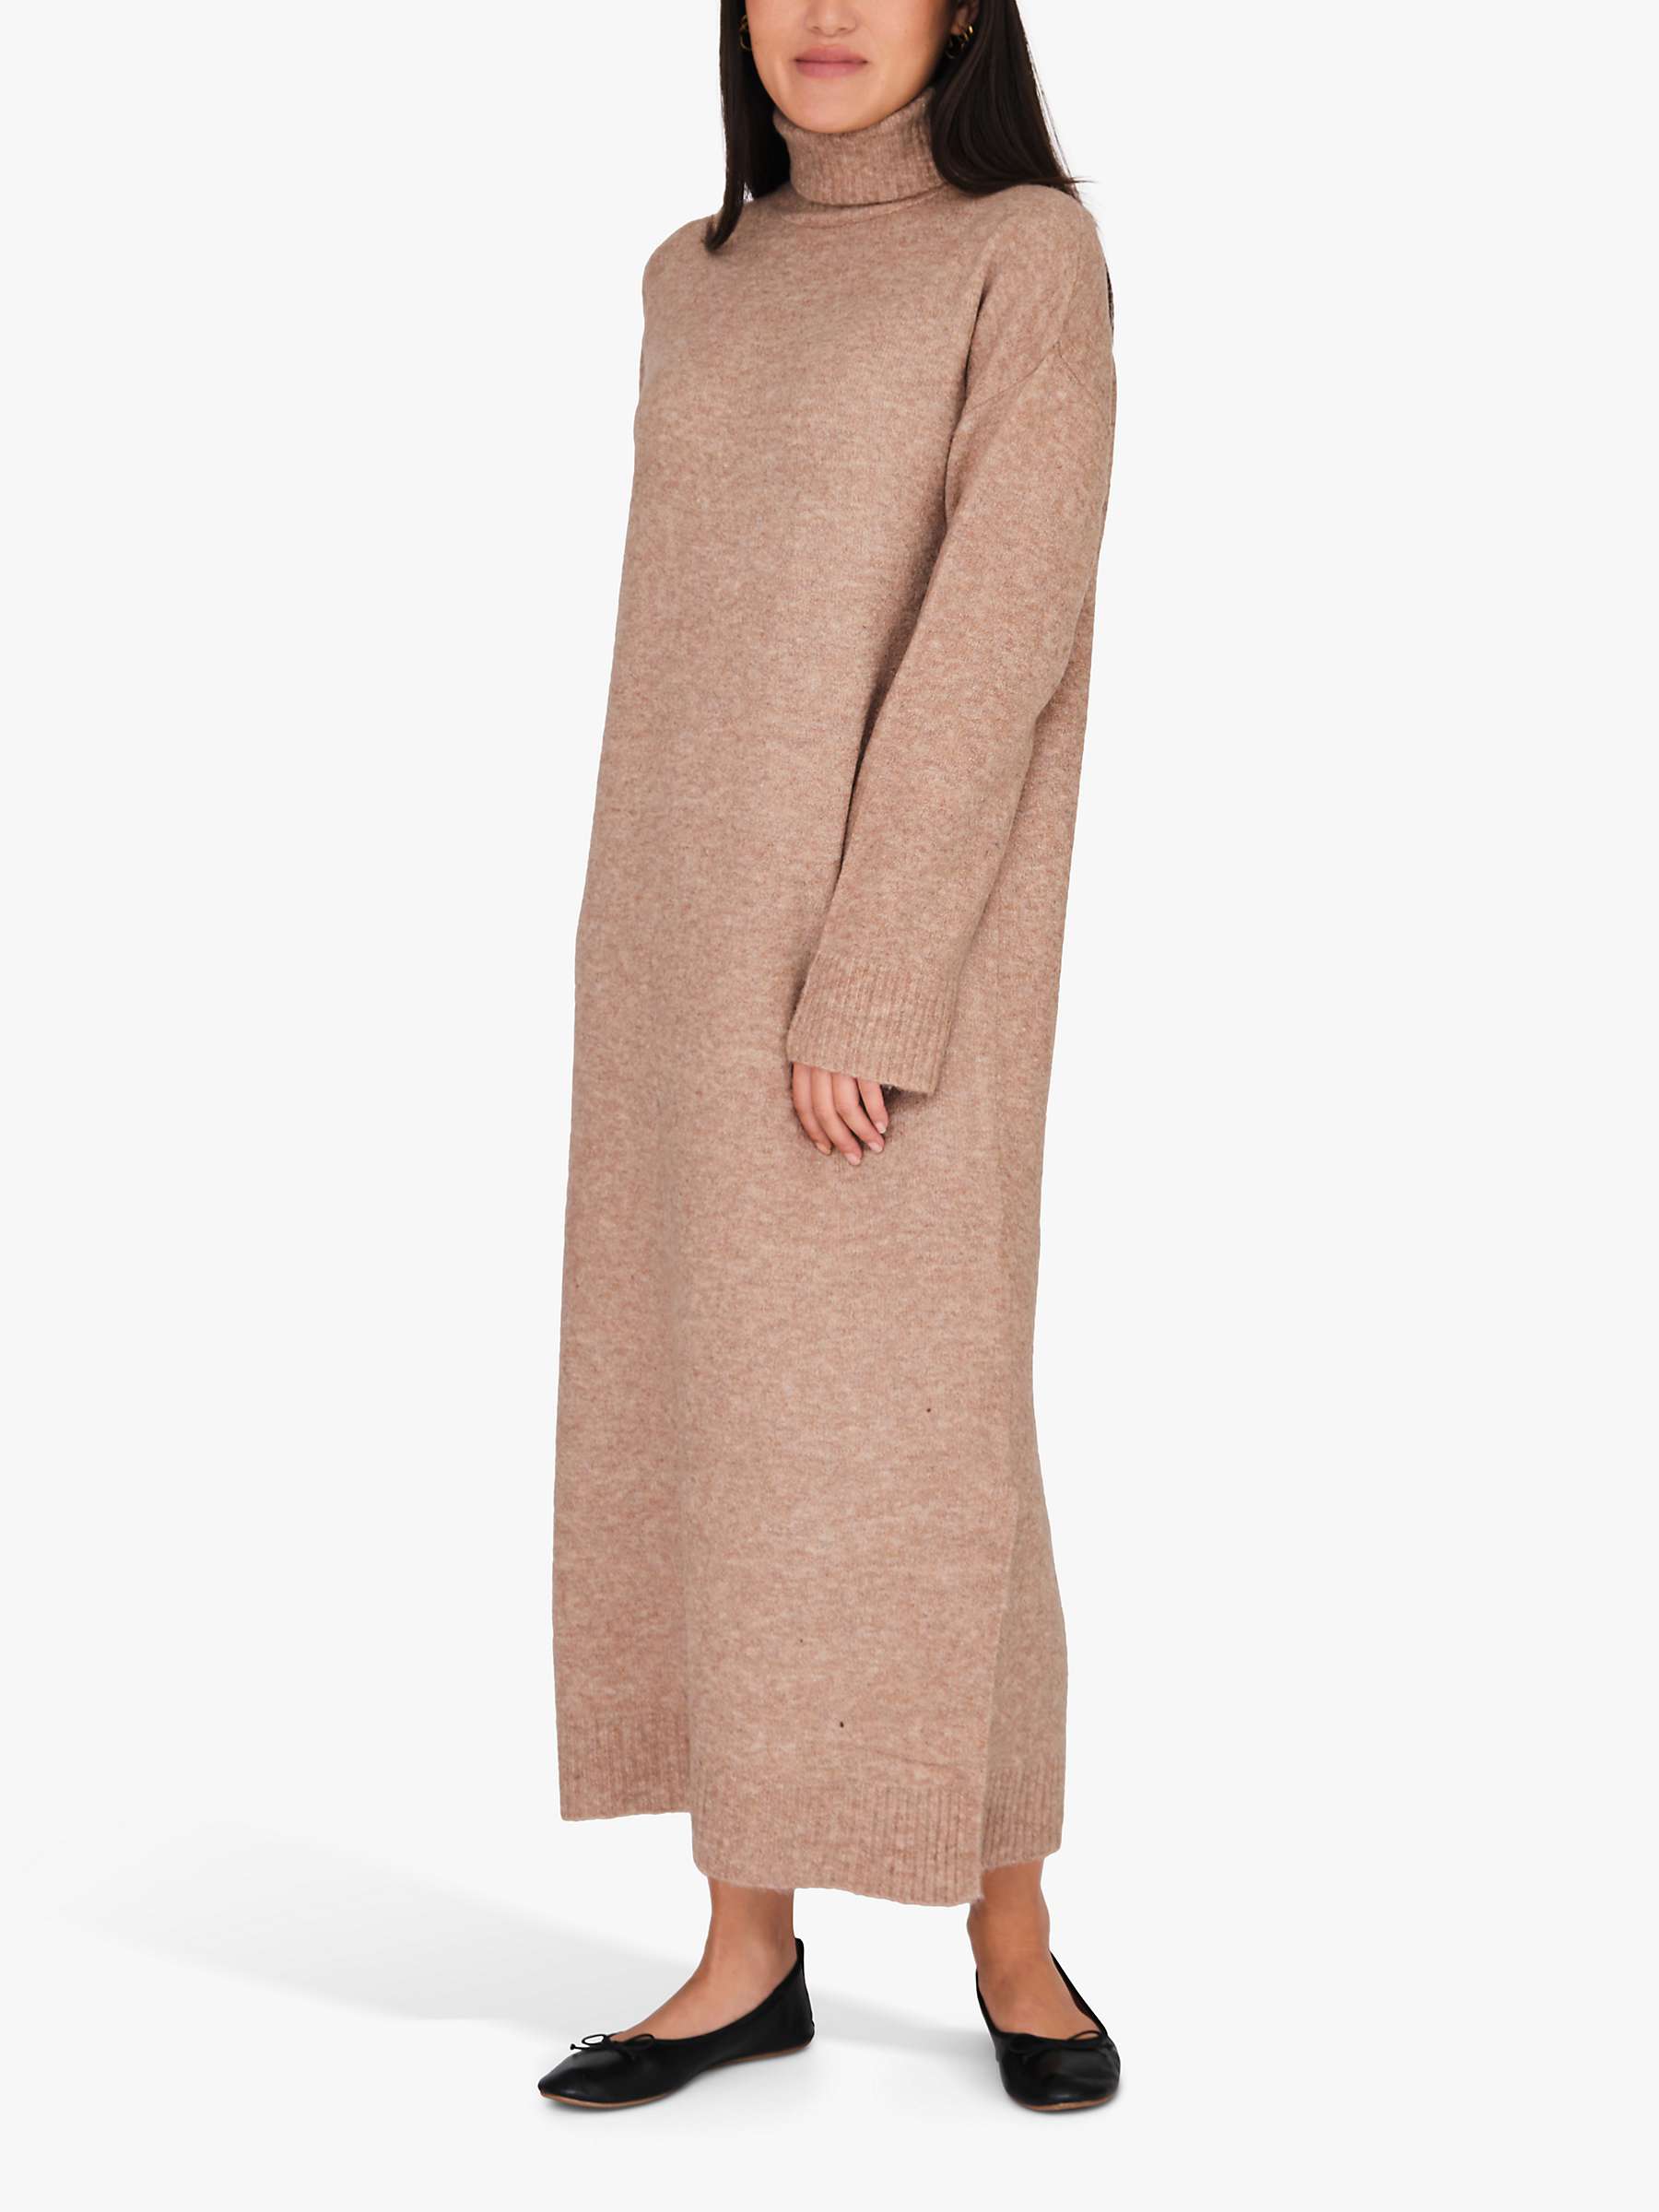 Buy A-VIEW Penny Knit Wool Blend Jumper Dress Online at johnlewis.com